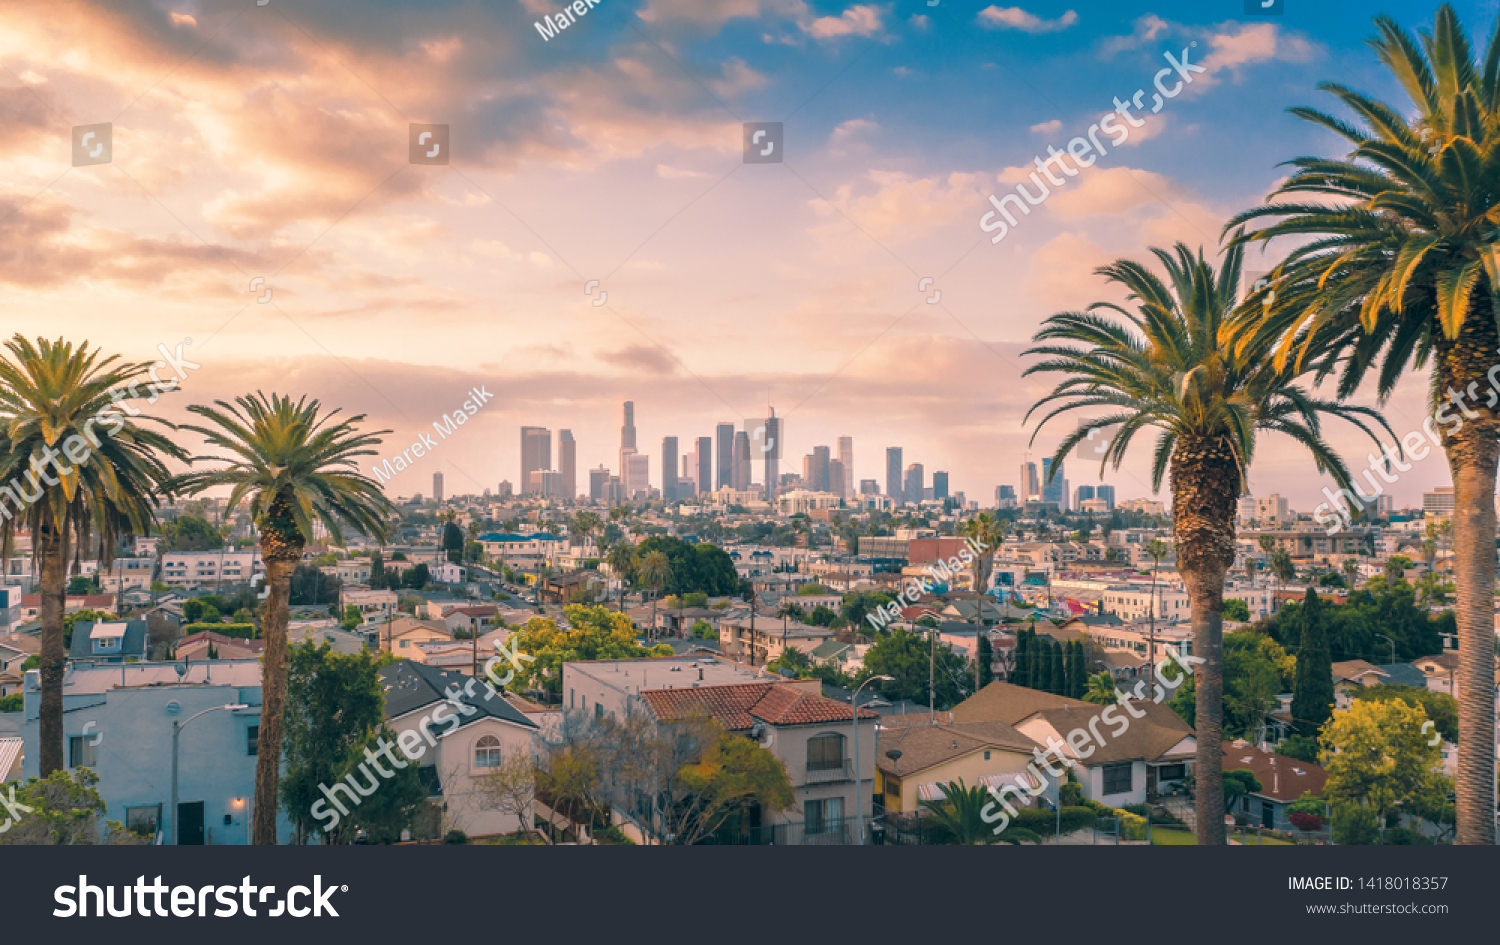 Beautiful sunset of Los Angeles downtown skyline and palm trees #1418018357